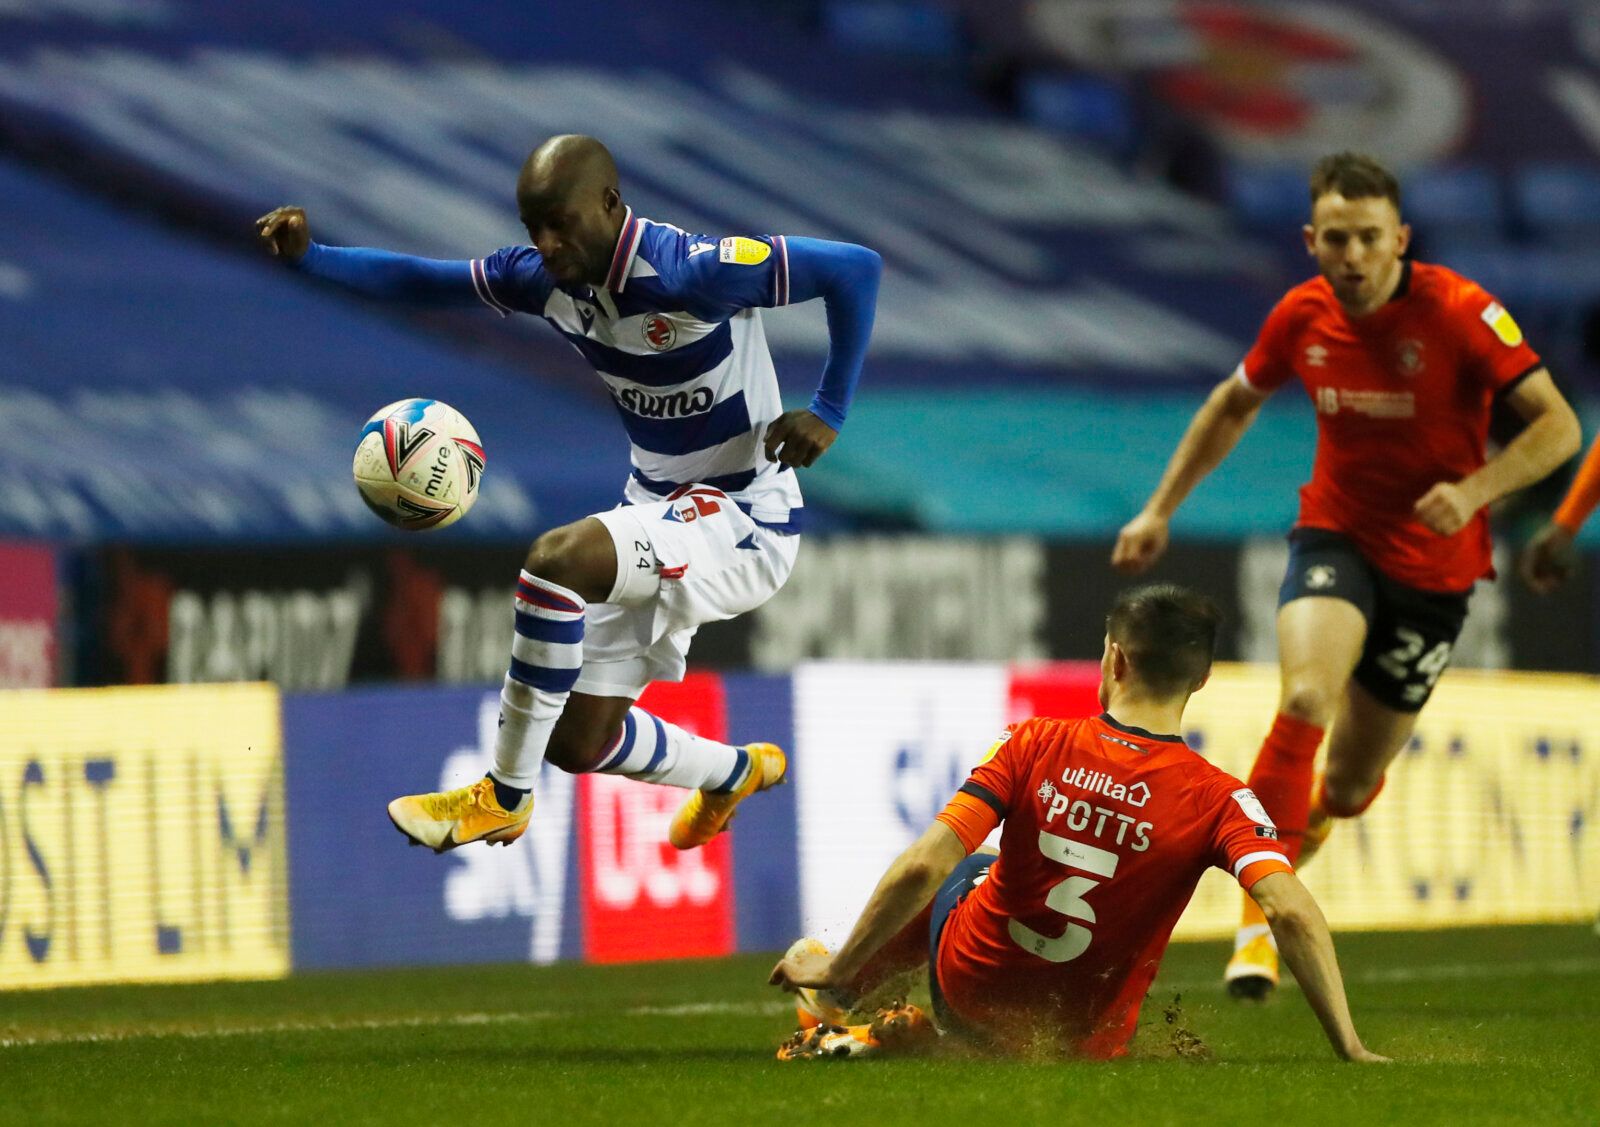 Soccer Football - Championship - Reading v Luton Town - Madejski Stadium, Reading, Britain - December 26, 2020 Reading's Sone Aluko in action with Luton Town's Dan Potts Action Images/Matthew Childs EDITORIAL USE ONLY. No use with unauthorized audio, video, data, fixture lists, club/league logos or 'live' services. Online in-match use limited to 75 images, no video emulation. No use in betting, games or single club /league/player publications.  Please contact your account representative for furt